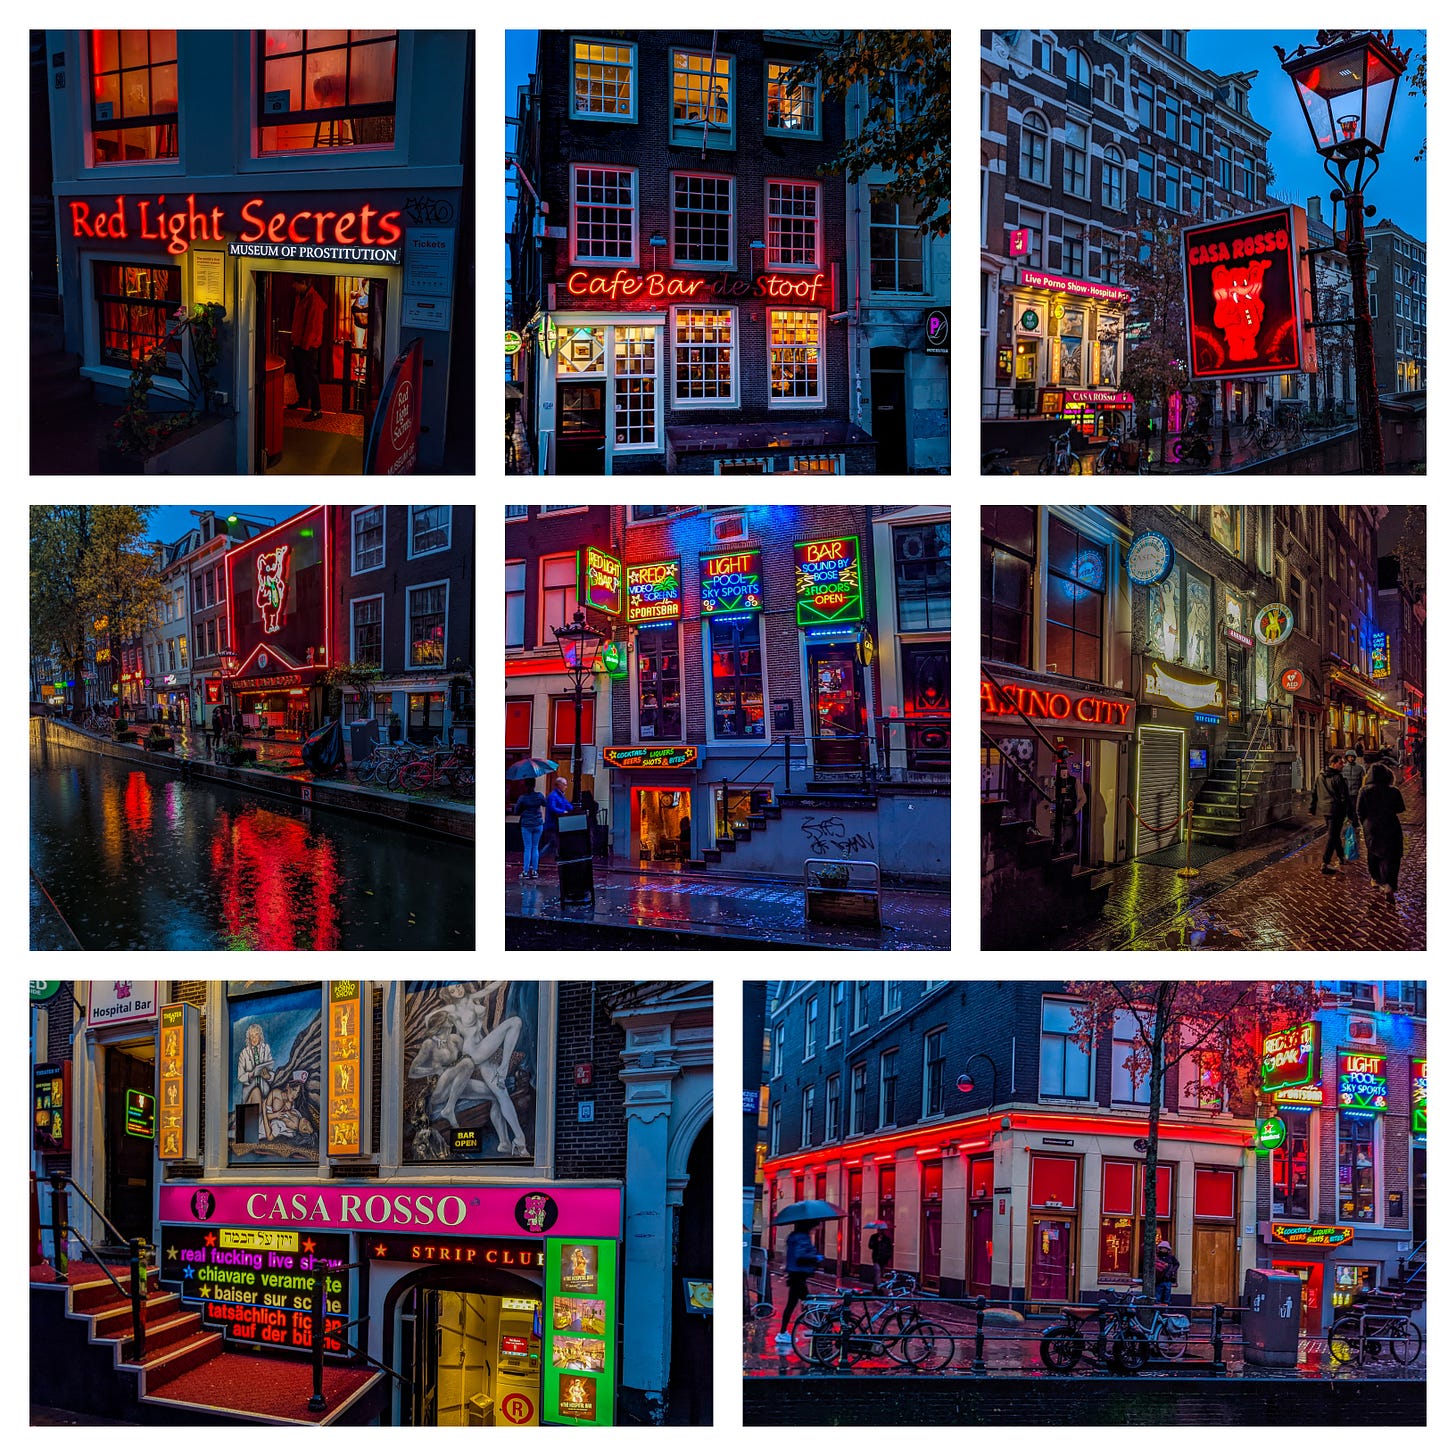 Eight photos showing the Red Light District at night, including Red Light Secrets and a variety of sex clubs with lots of colorful neon signs. 